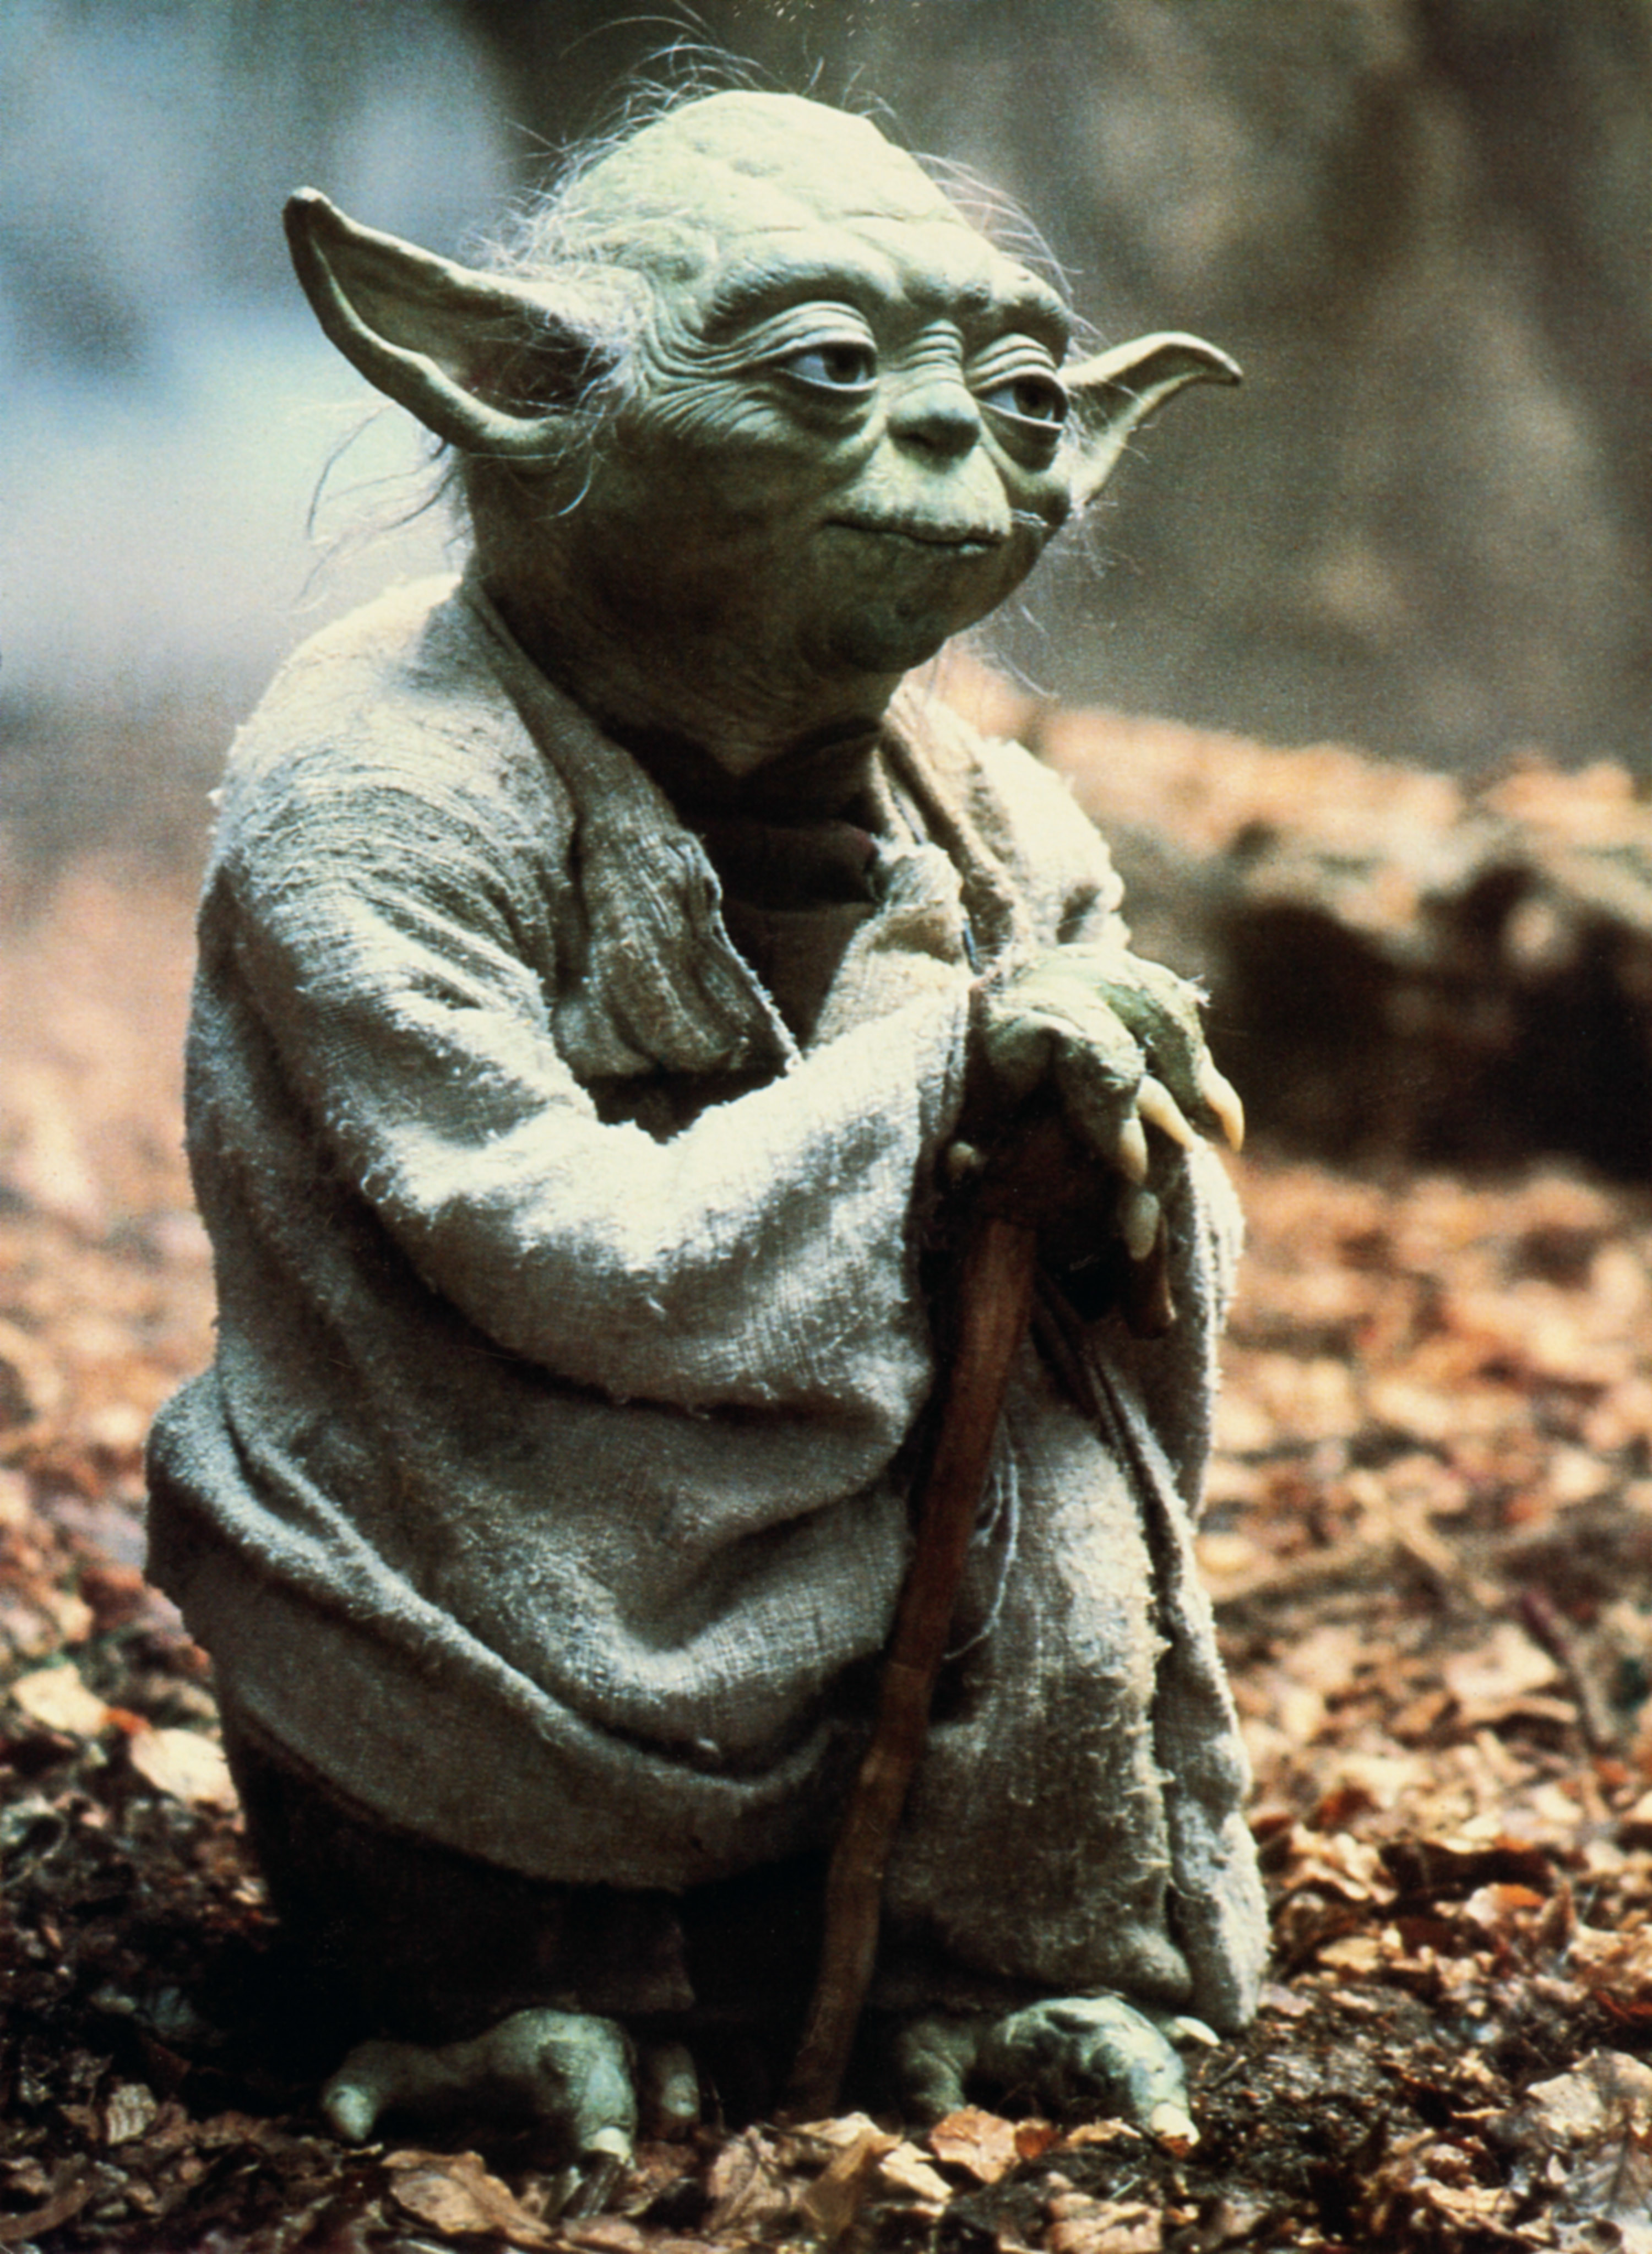 Better than making love what is? Hate sex yes. Hmm. - Yoda